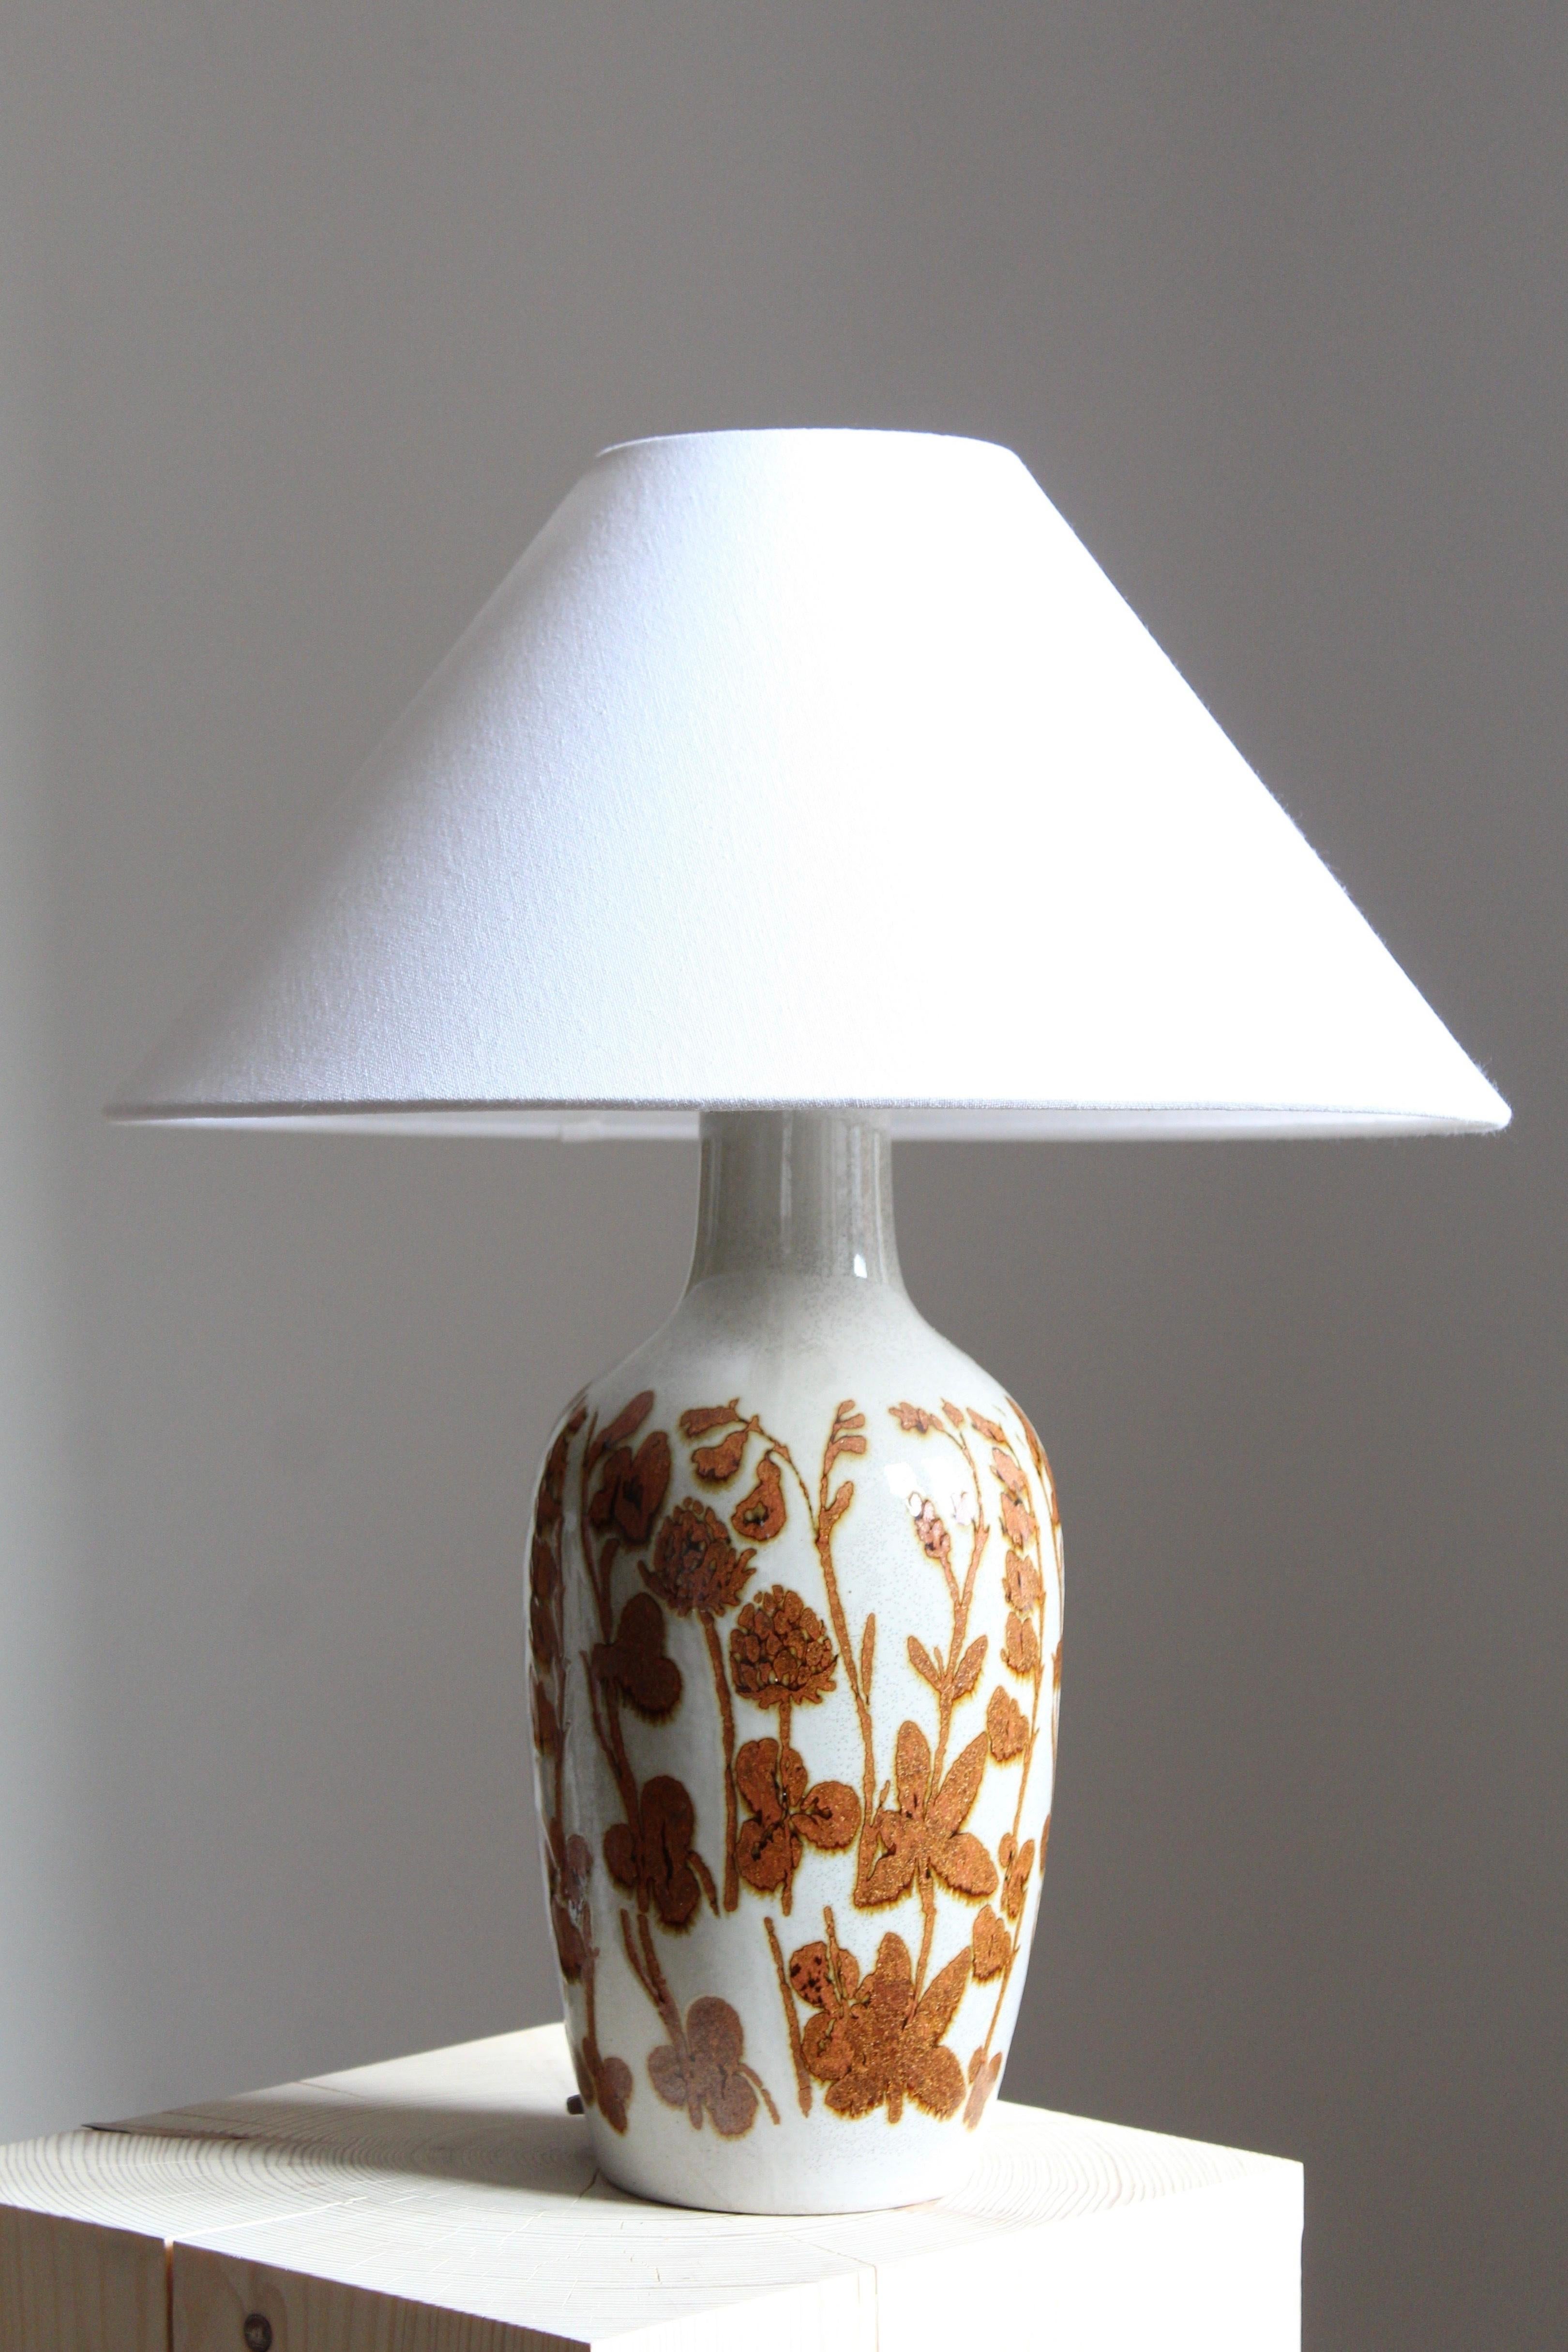 A table lamp by Carl-Harry Stålhane and potter Kent Eriksson, for Carl-Harry Stålhanes own studio, Designhuset, Sweden. Signed. Shade not included.

Glaze features white-brown colors.

Other ceramicists of the period include Berndt Friberg, Axel